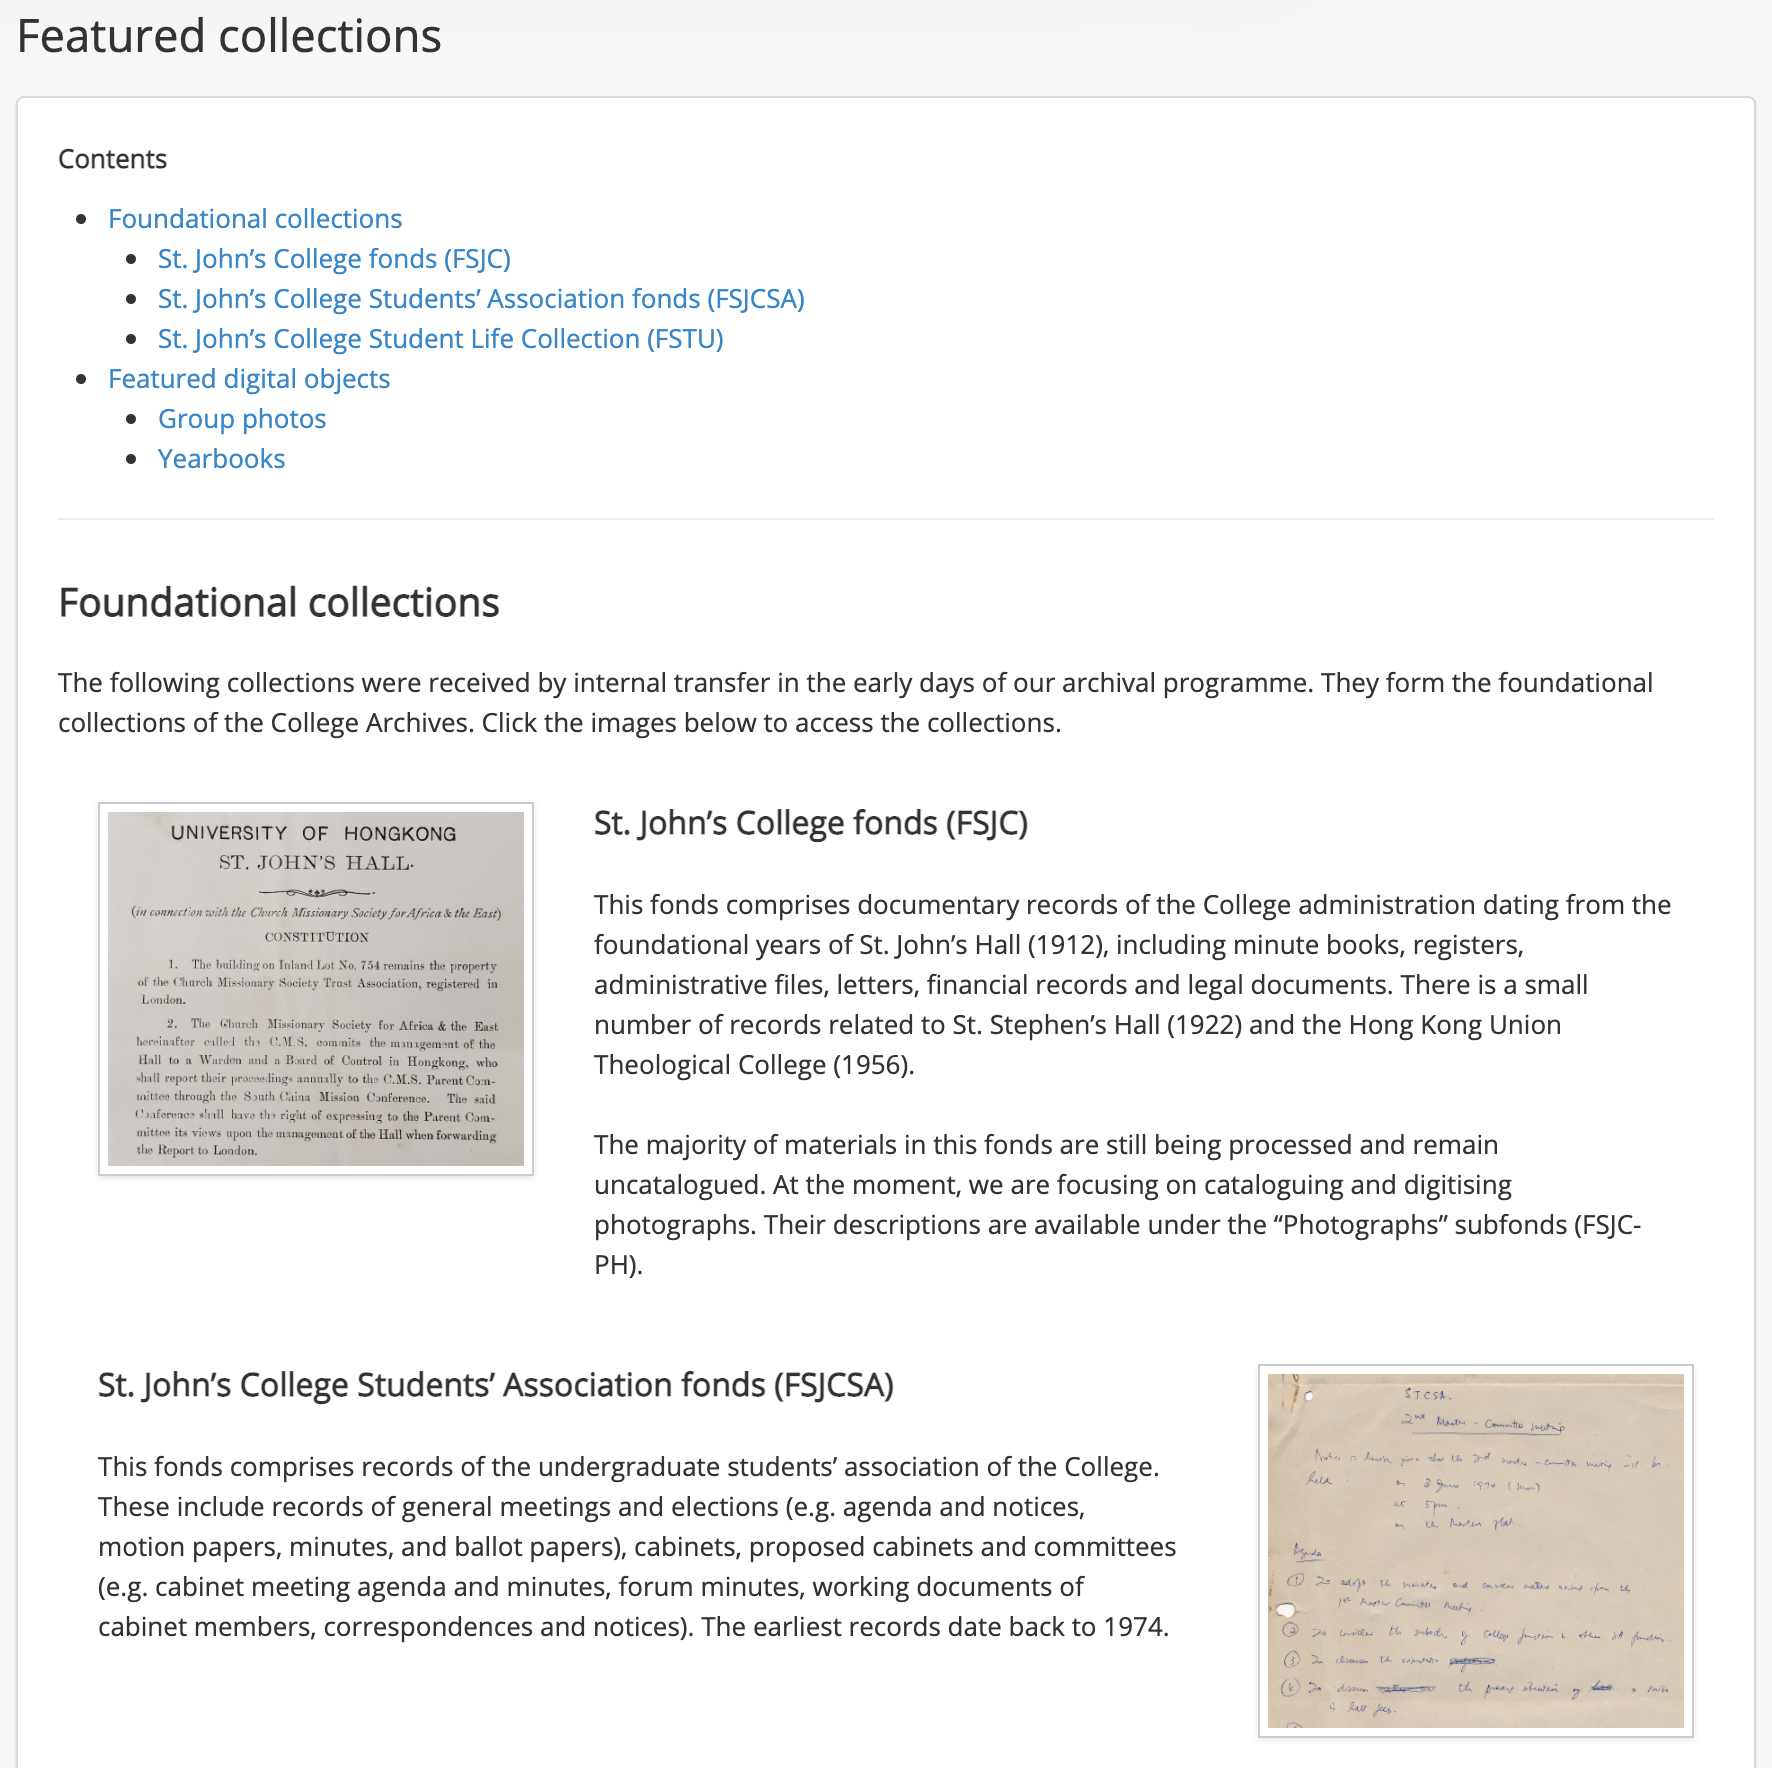 Featured collections page